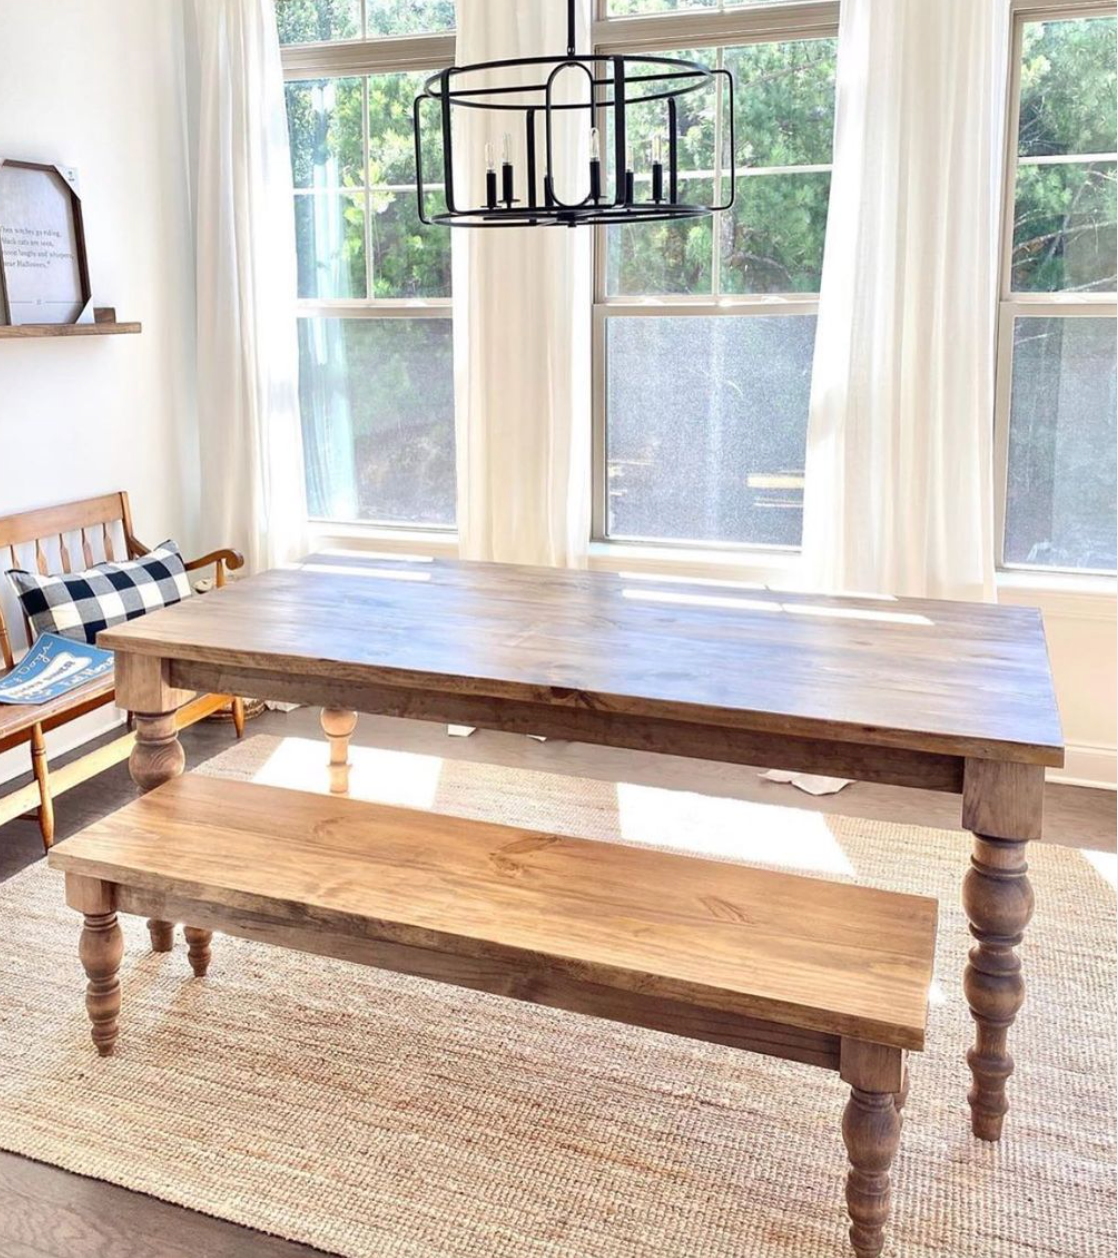 Beautiful bench and dining table set featuring Carolina Leg Co Modern Chunky Farmhouse Bench Legs and Coffee Table Legs- 3.5 inches by 16 inches - Sustainably Sourced American Pine - Set of 4 - Handmade in NC